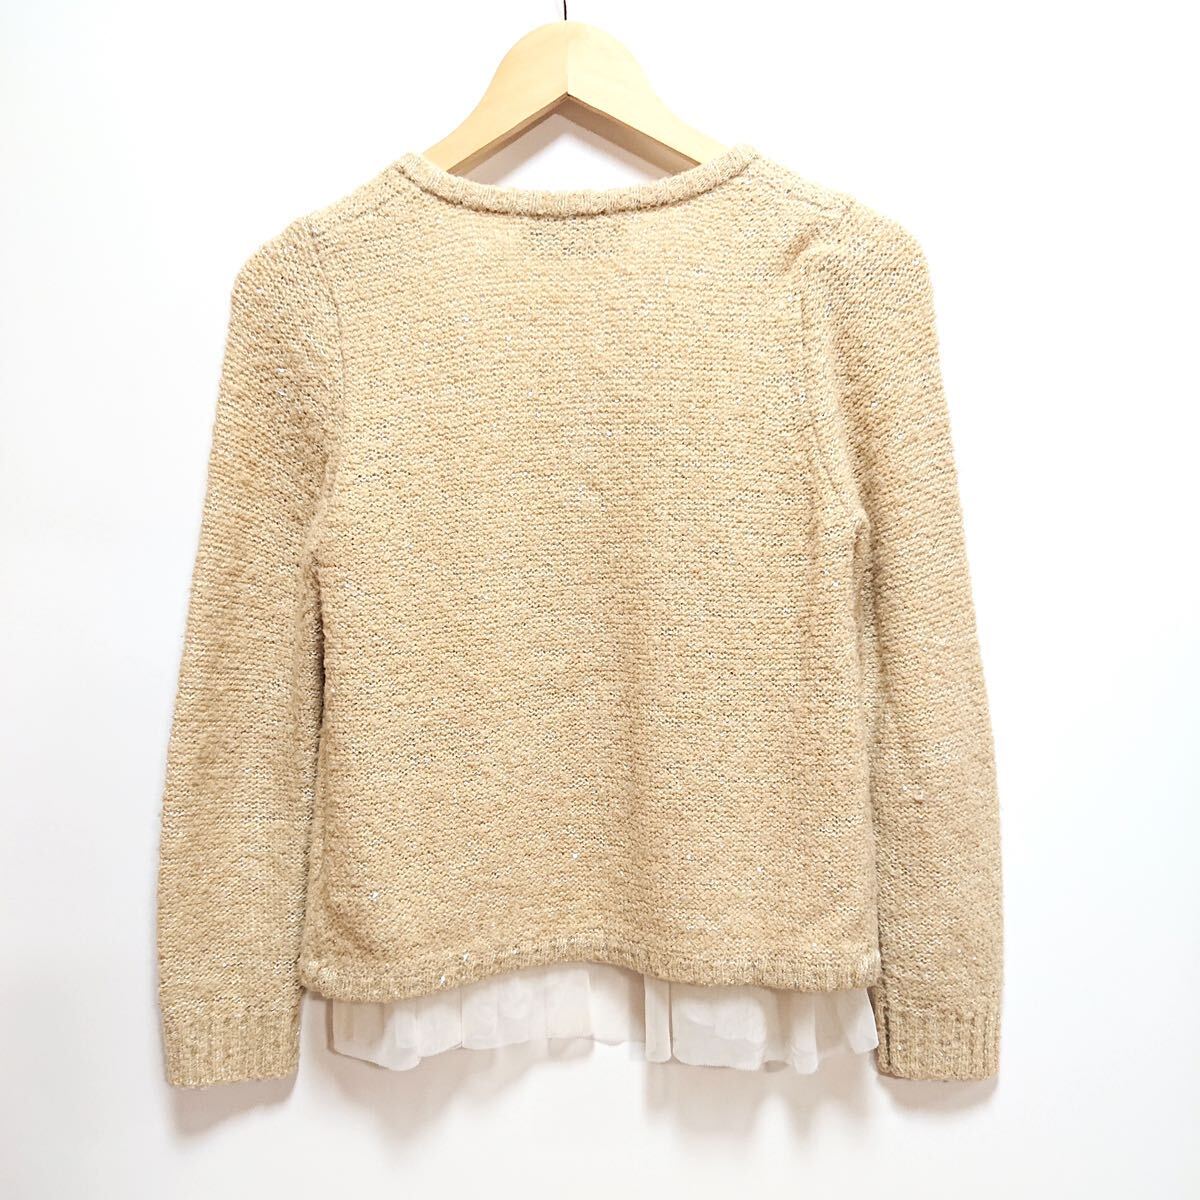 H7917gg ROPE\'( Rope ) size M knitted cardigan beige group ivory lady's lame frill attaching lovely on goods stylish 